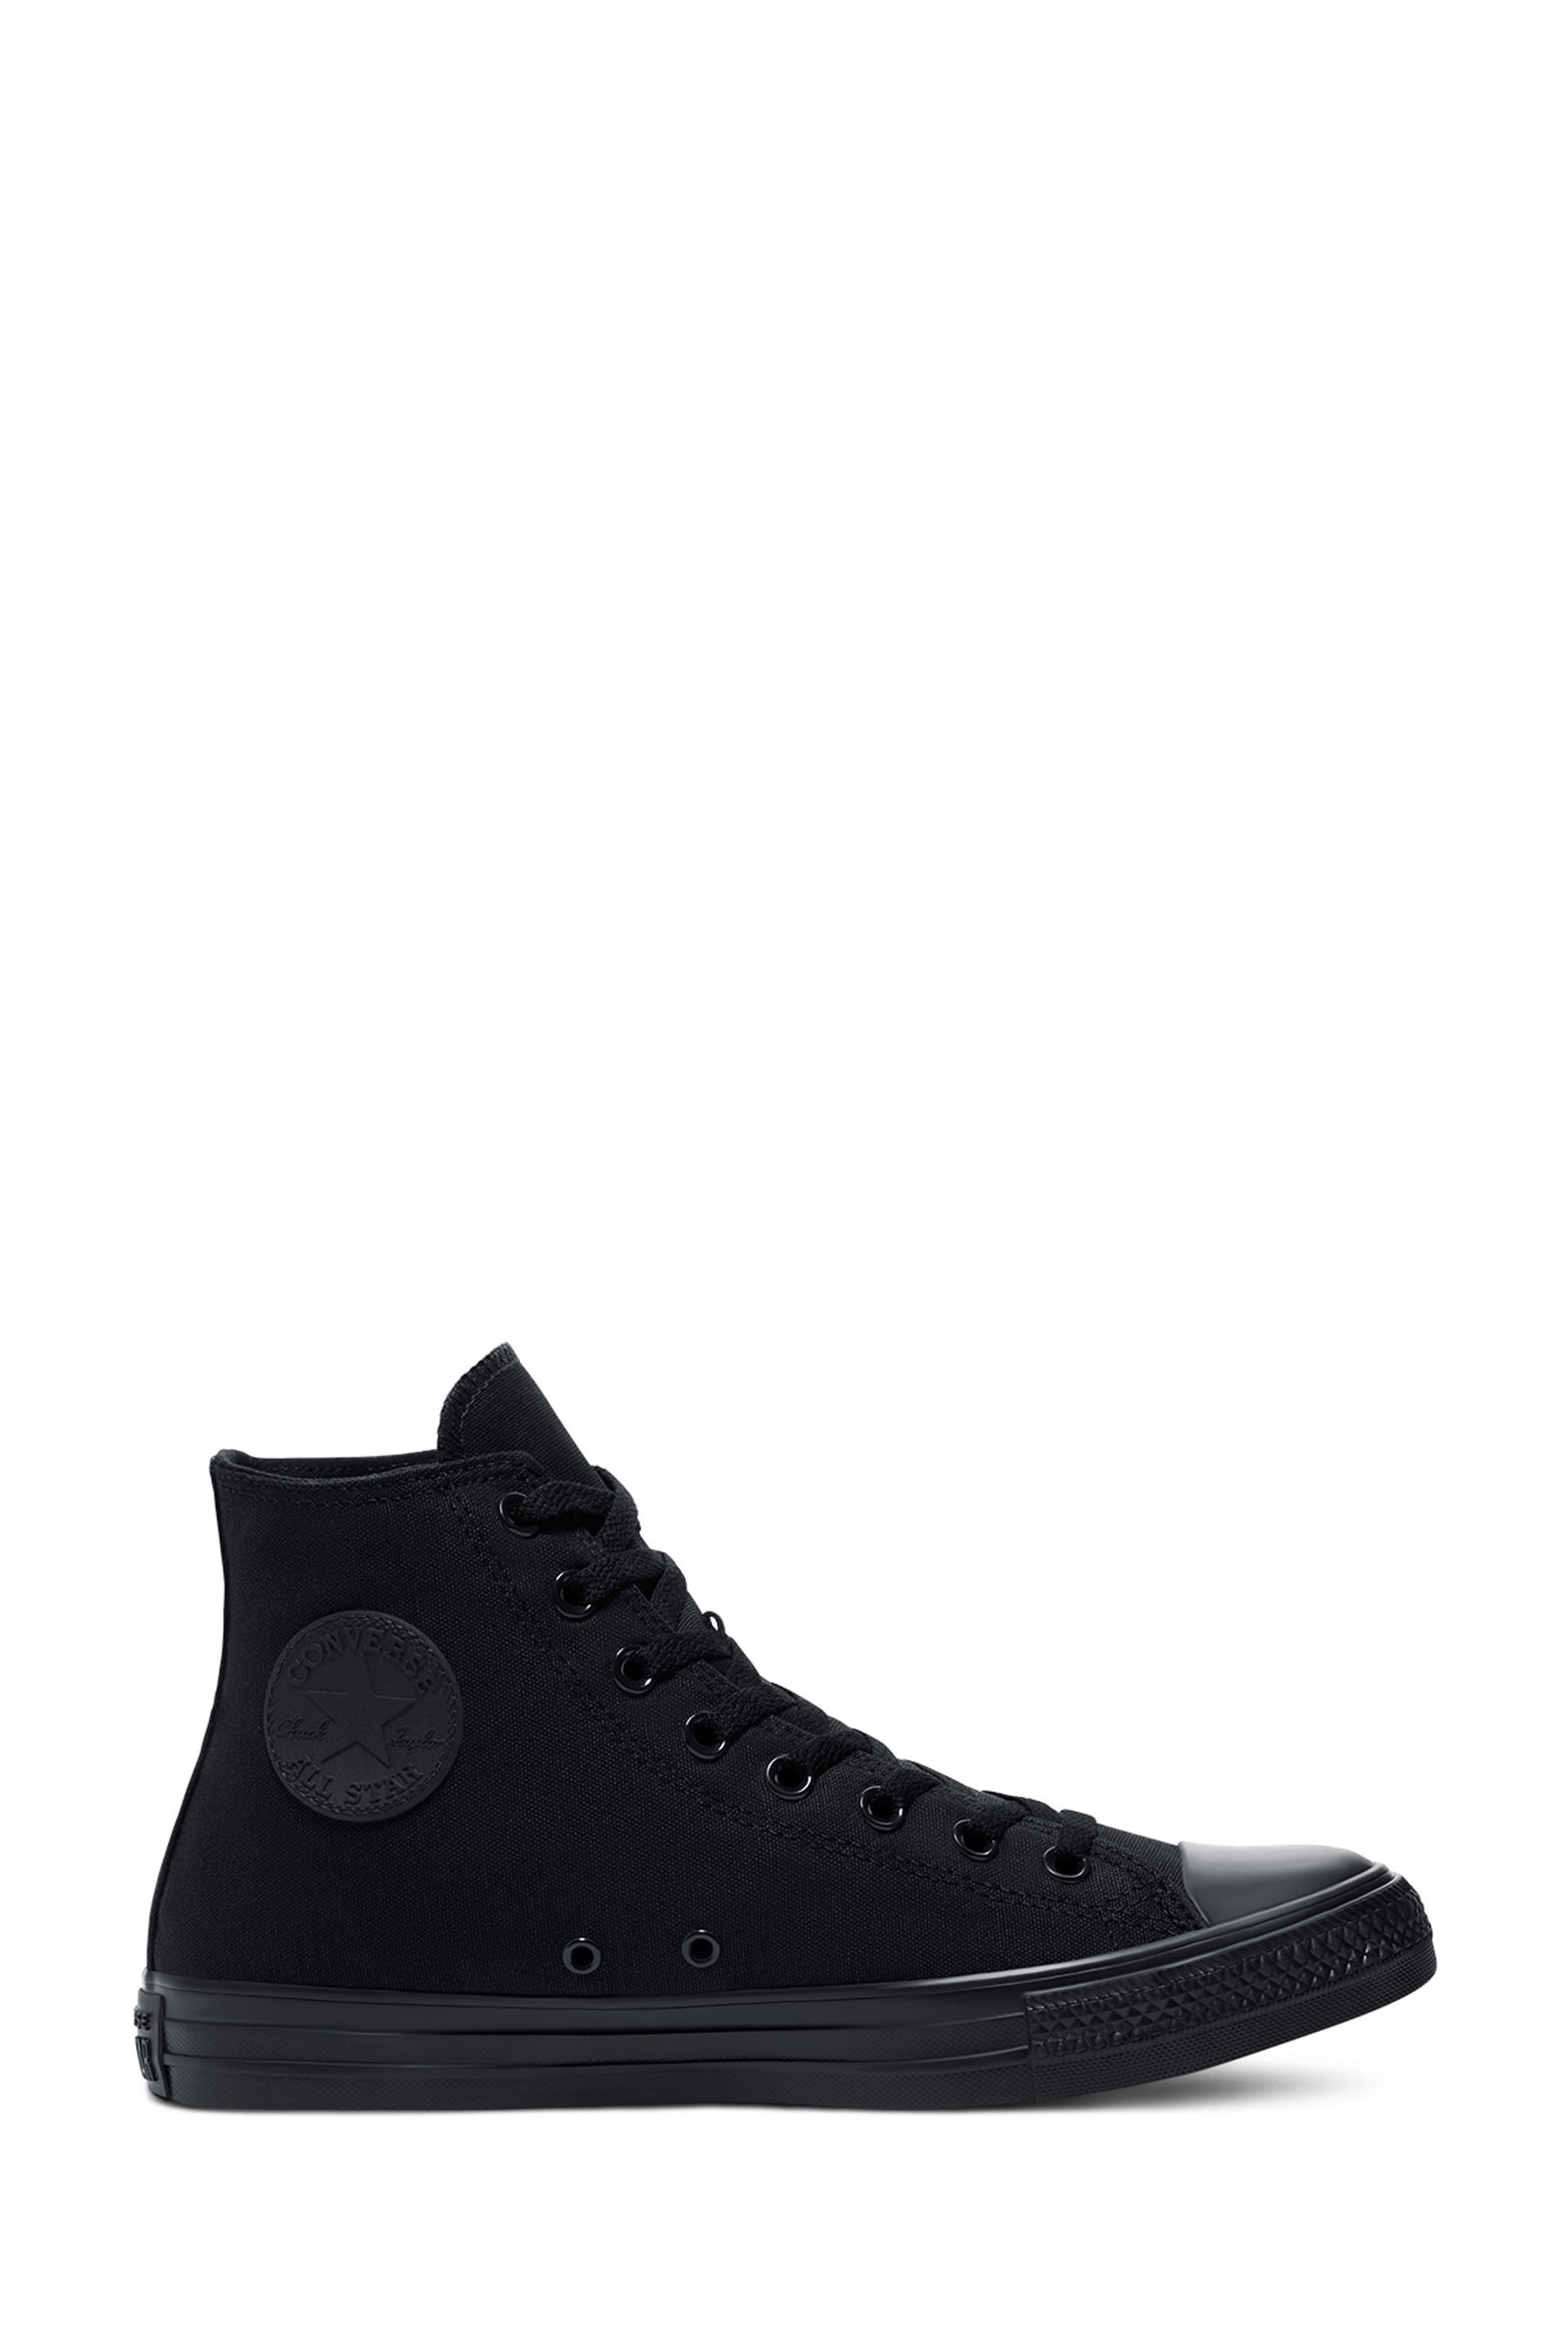 Buy Converse Black Chuck Taylor All Star High Trainers from the Next UK ...